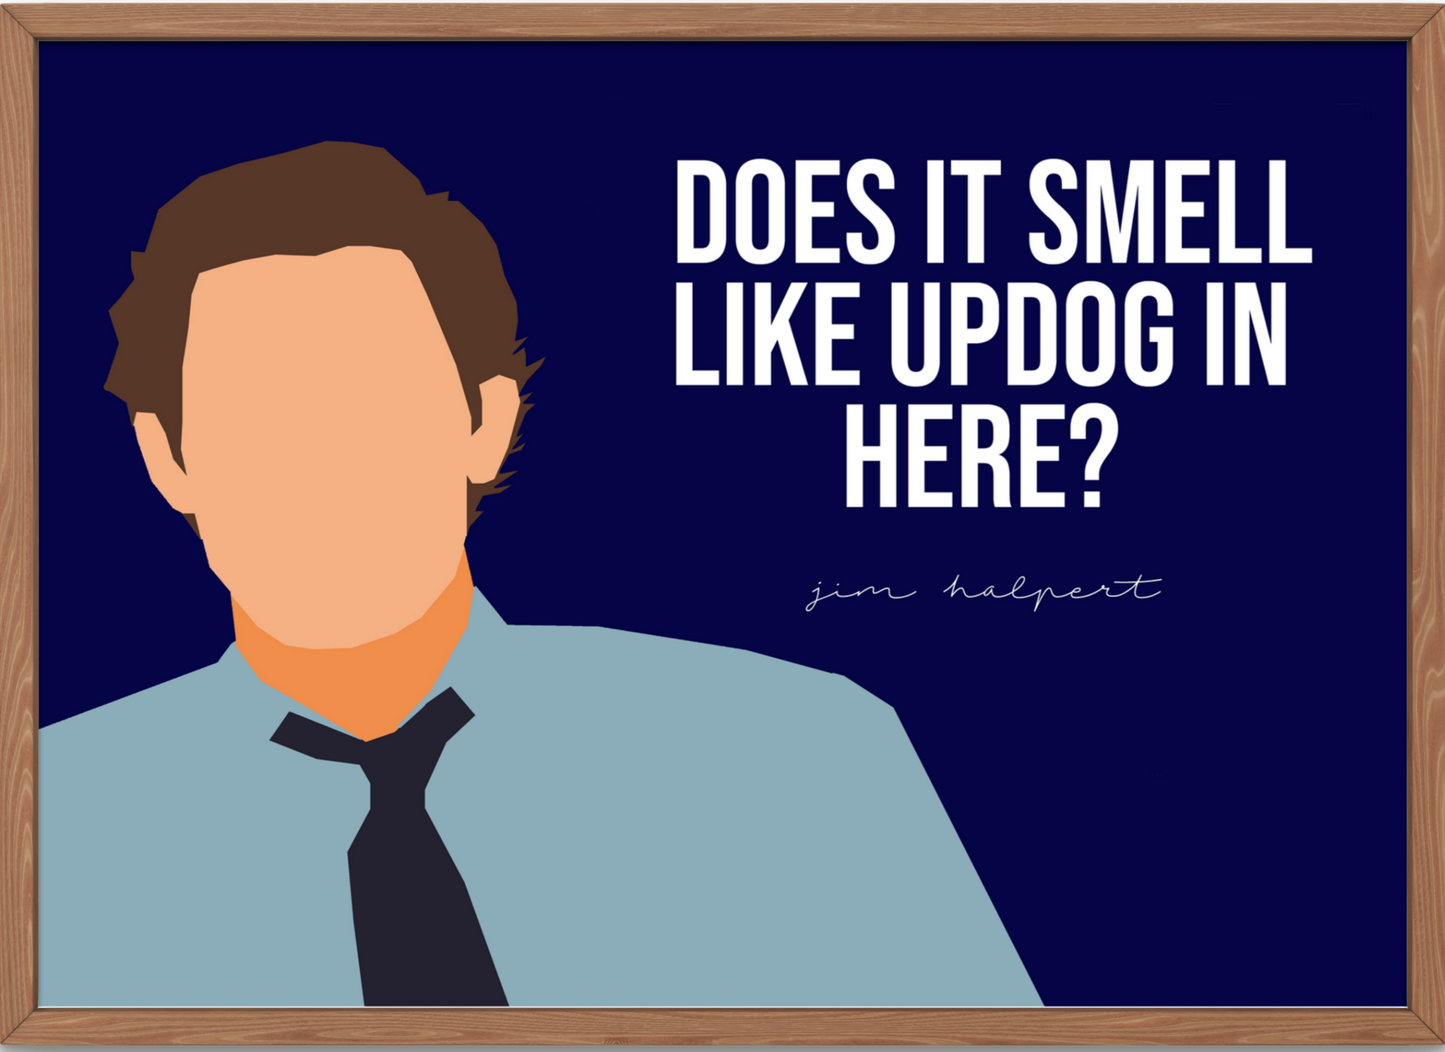 The Office Poster | Does it smell like updog in here? - Jim Halpert